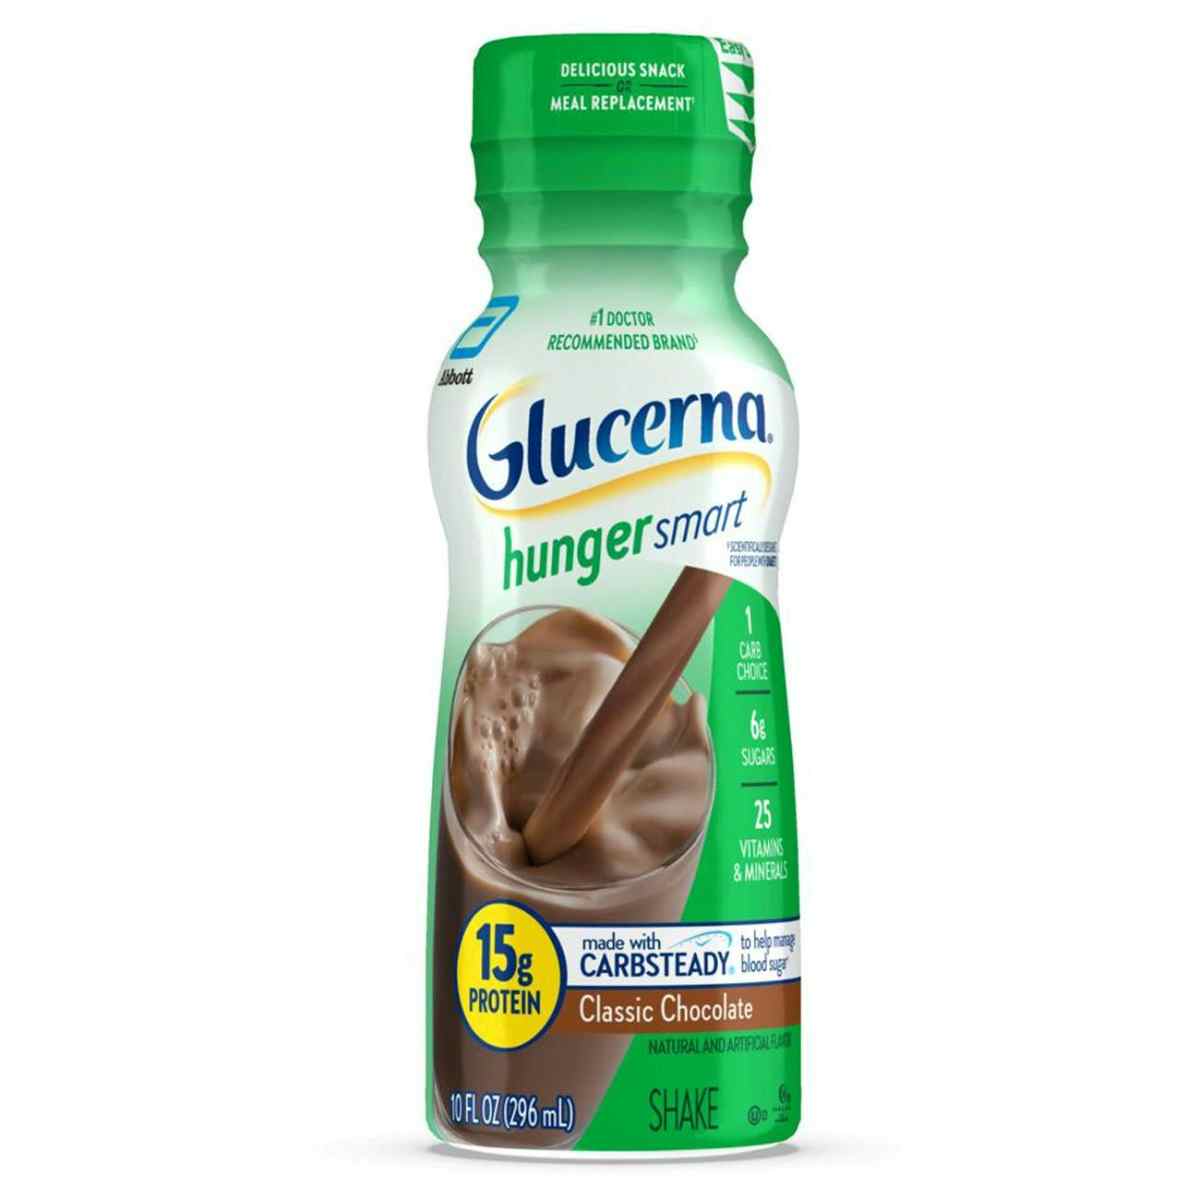 Glucerna Hunger Smart Shake with CARBSTEADY